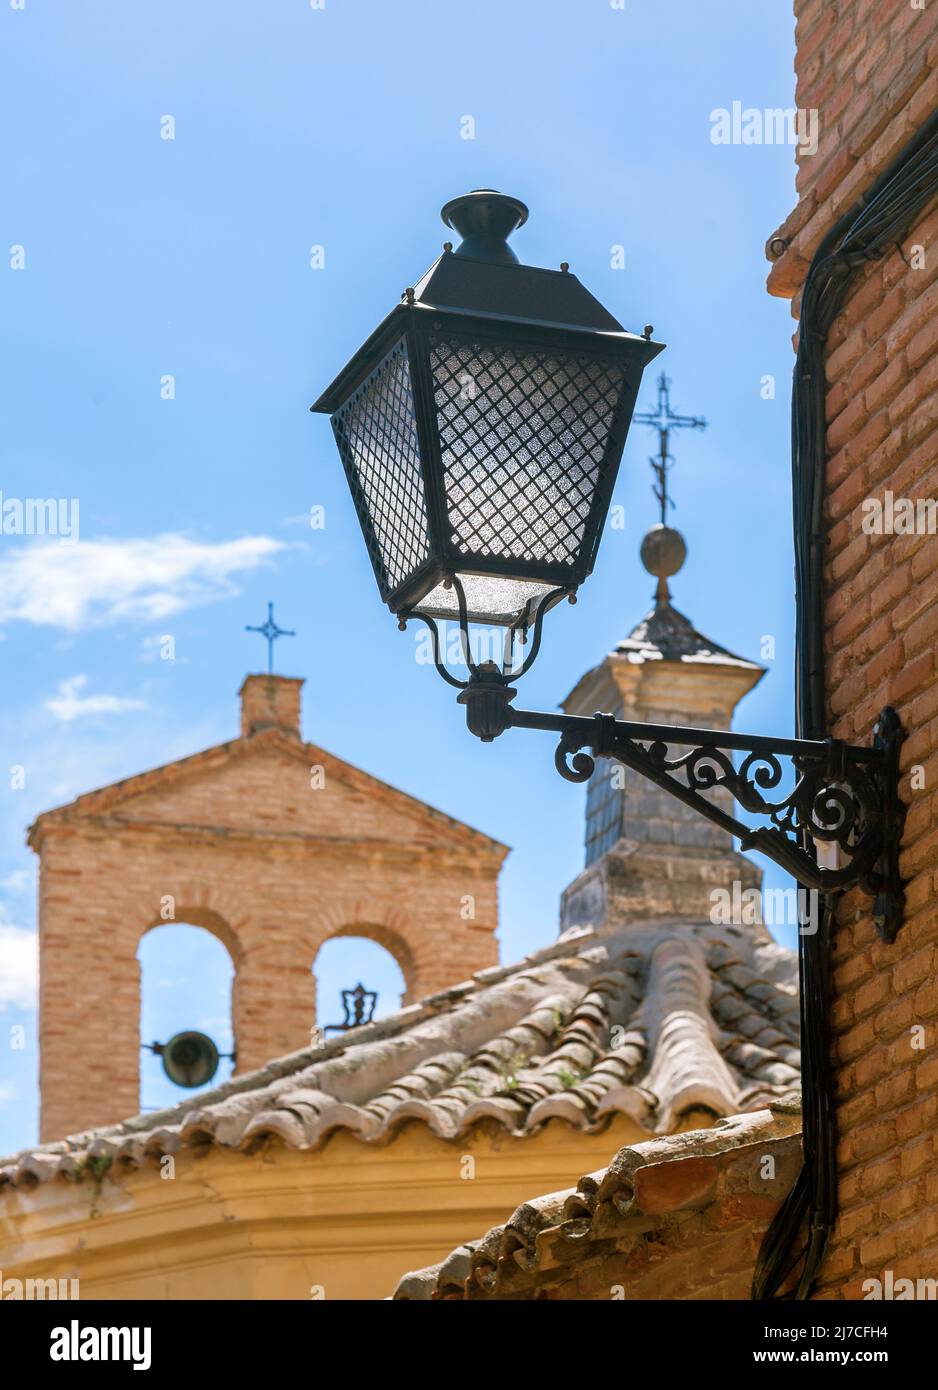 Old town of the medieval city of Toledo Stock Photo